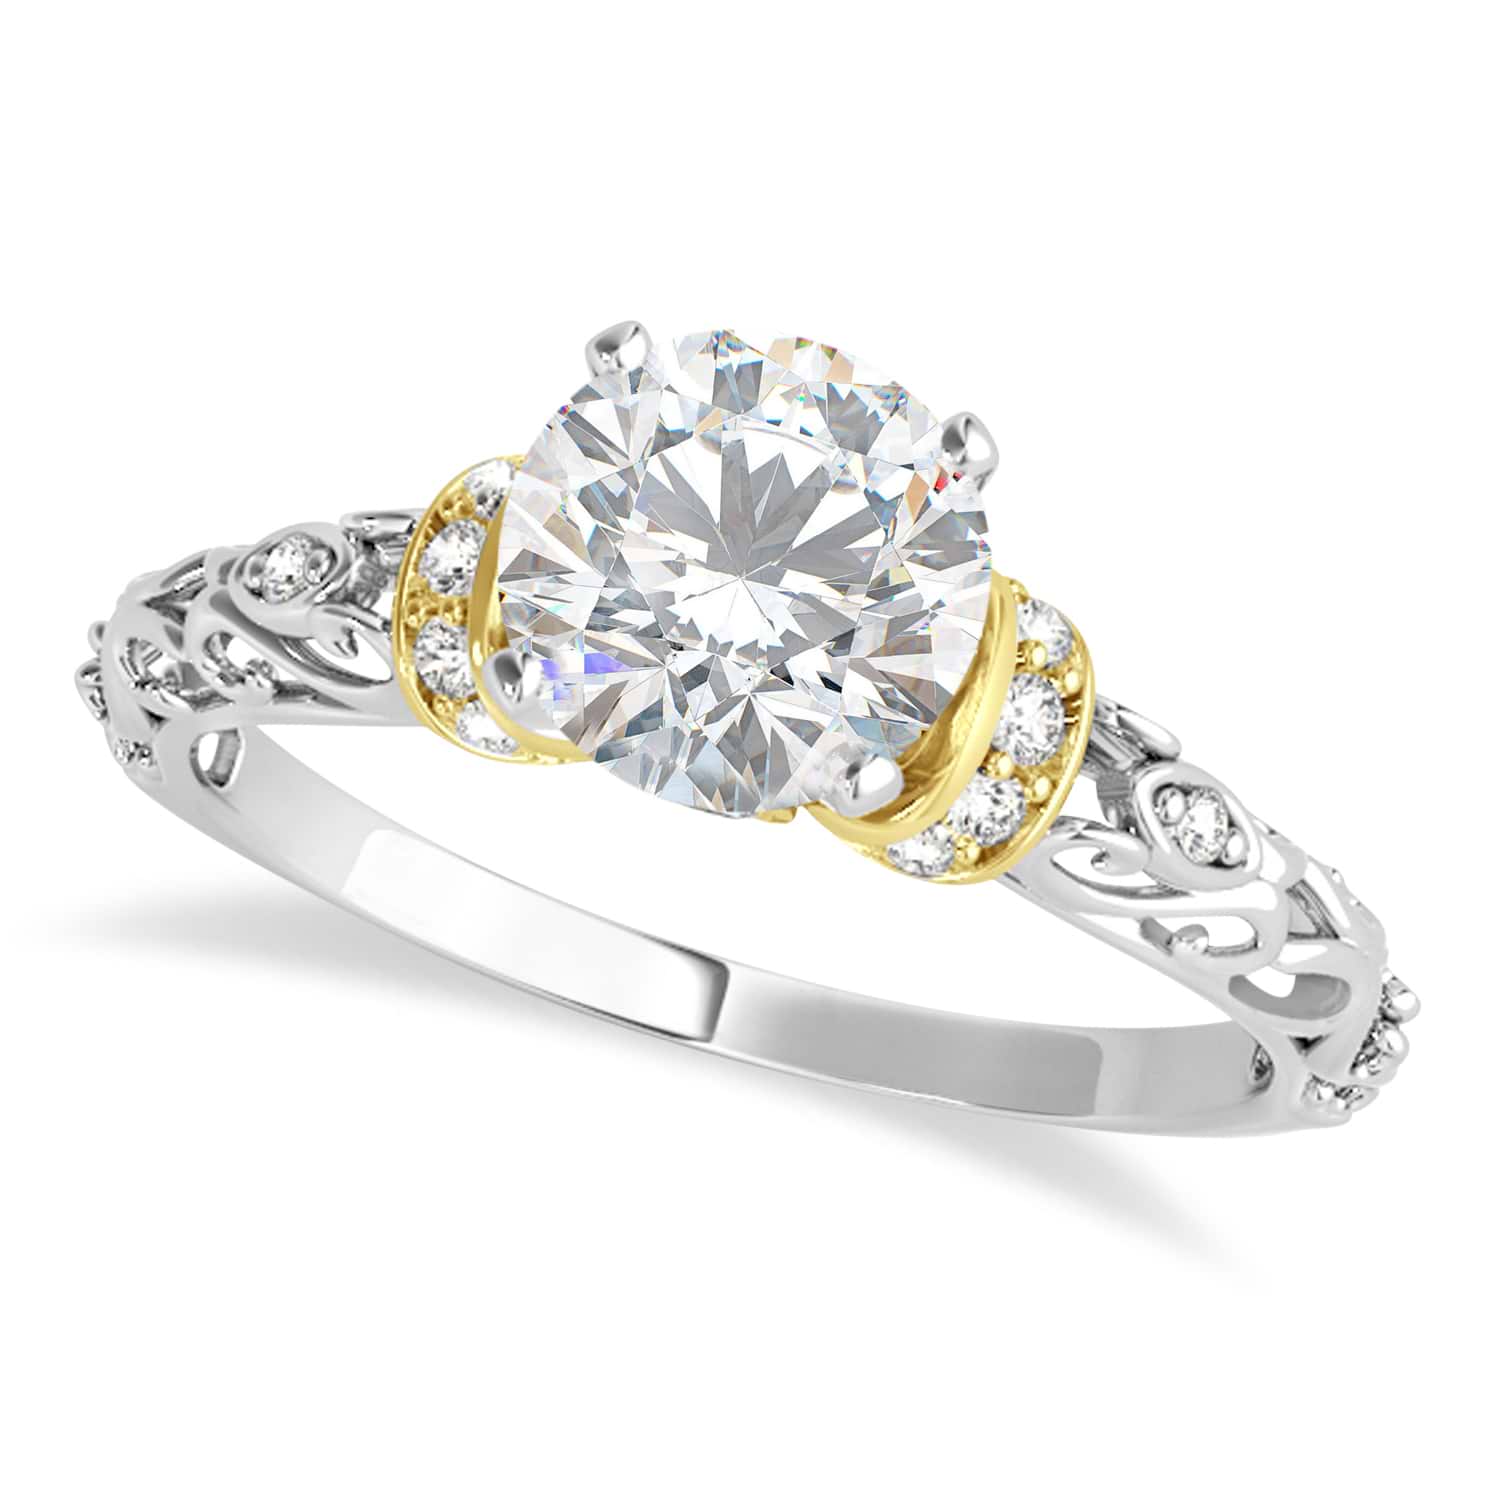 Moissanite & Diamond Antique Style Engagement Ring 18k Two-Tone Gold (0.87ct)